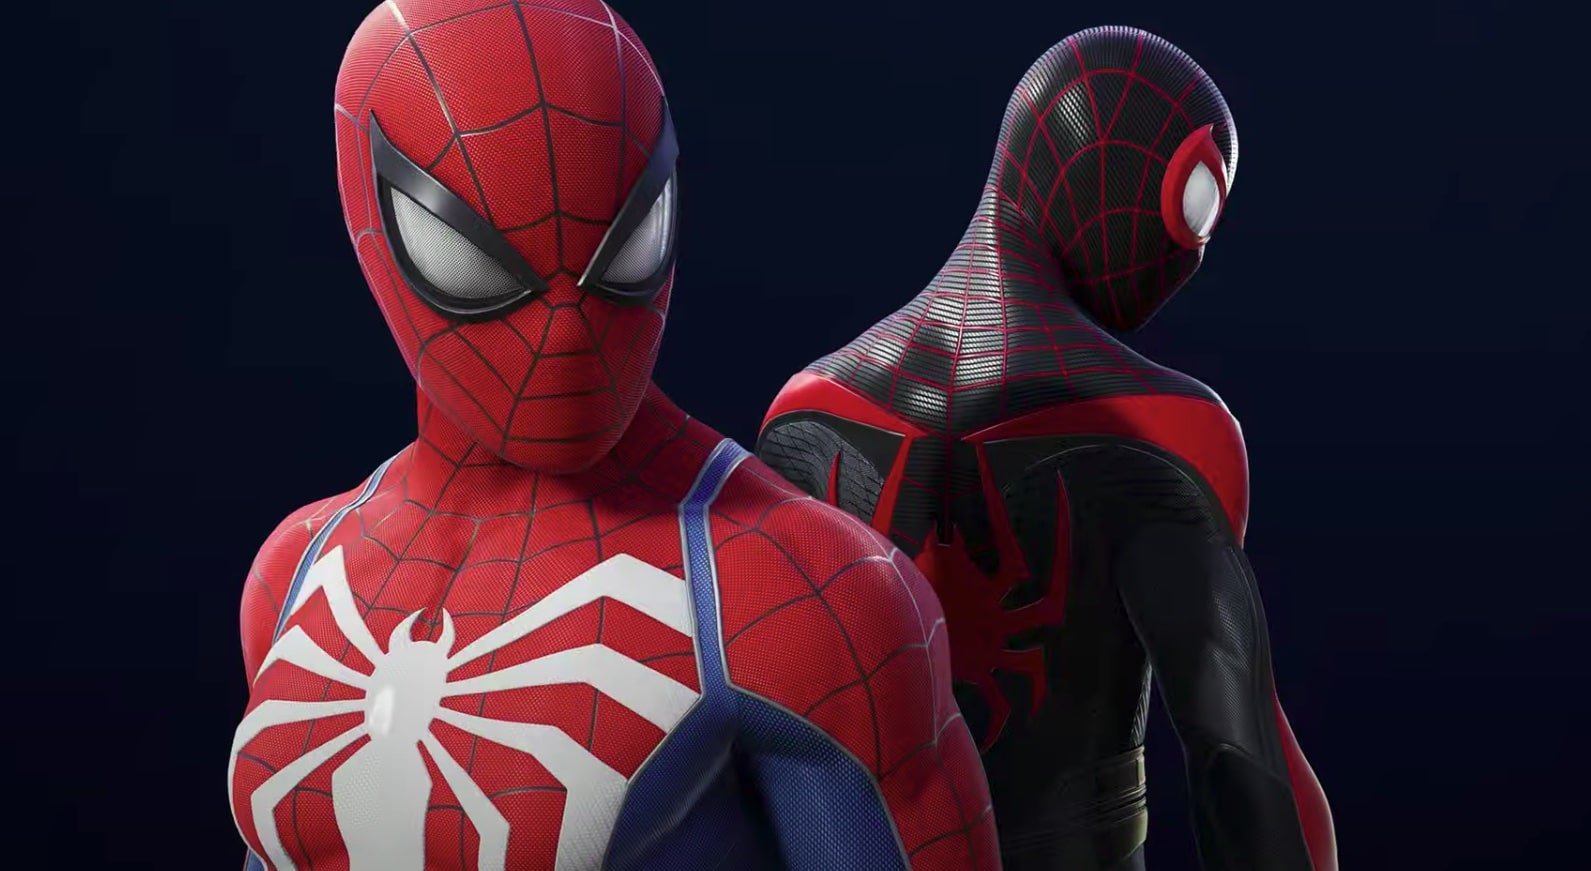 Marvel's Spider-Man 2 trailer shows off new suits, enormous map, slick fast  travel